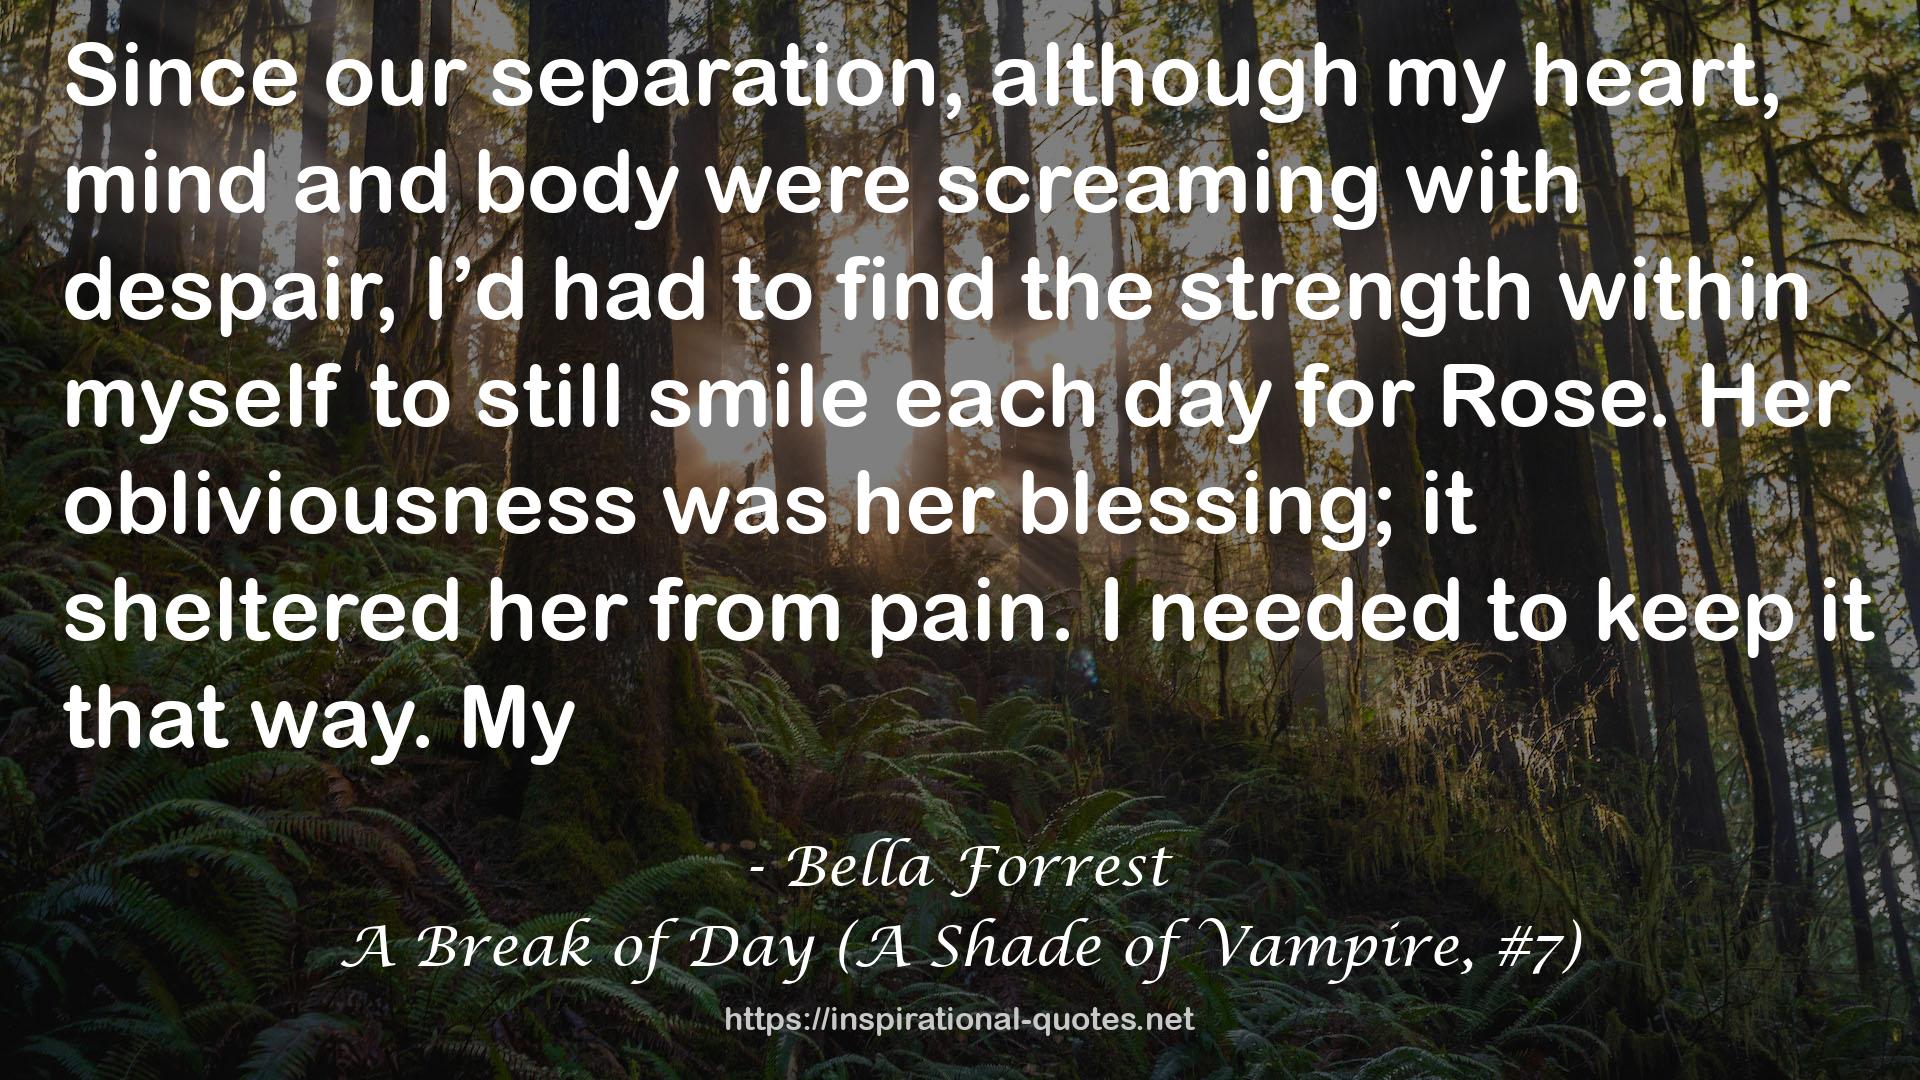 A Break of Day (A Shade of Vampire, #7) QUOTES